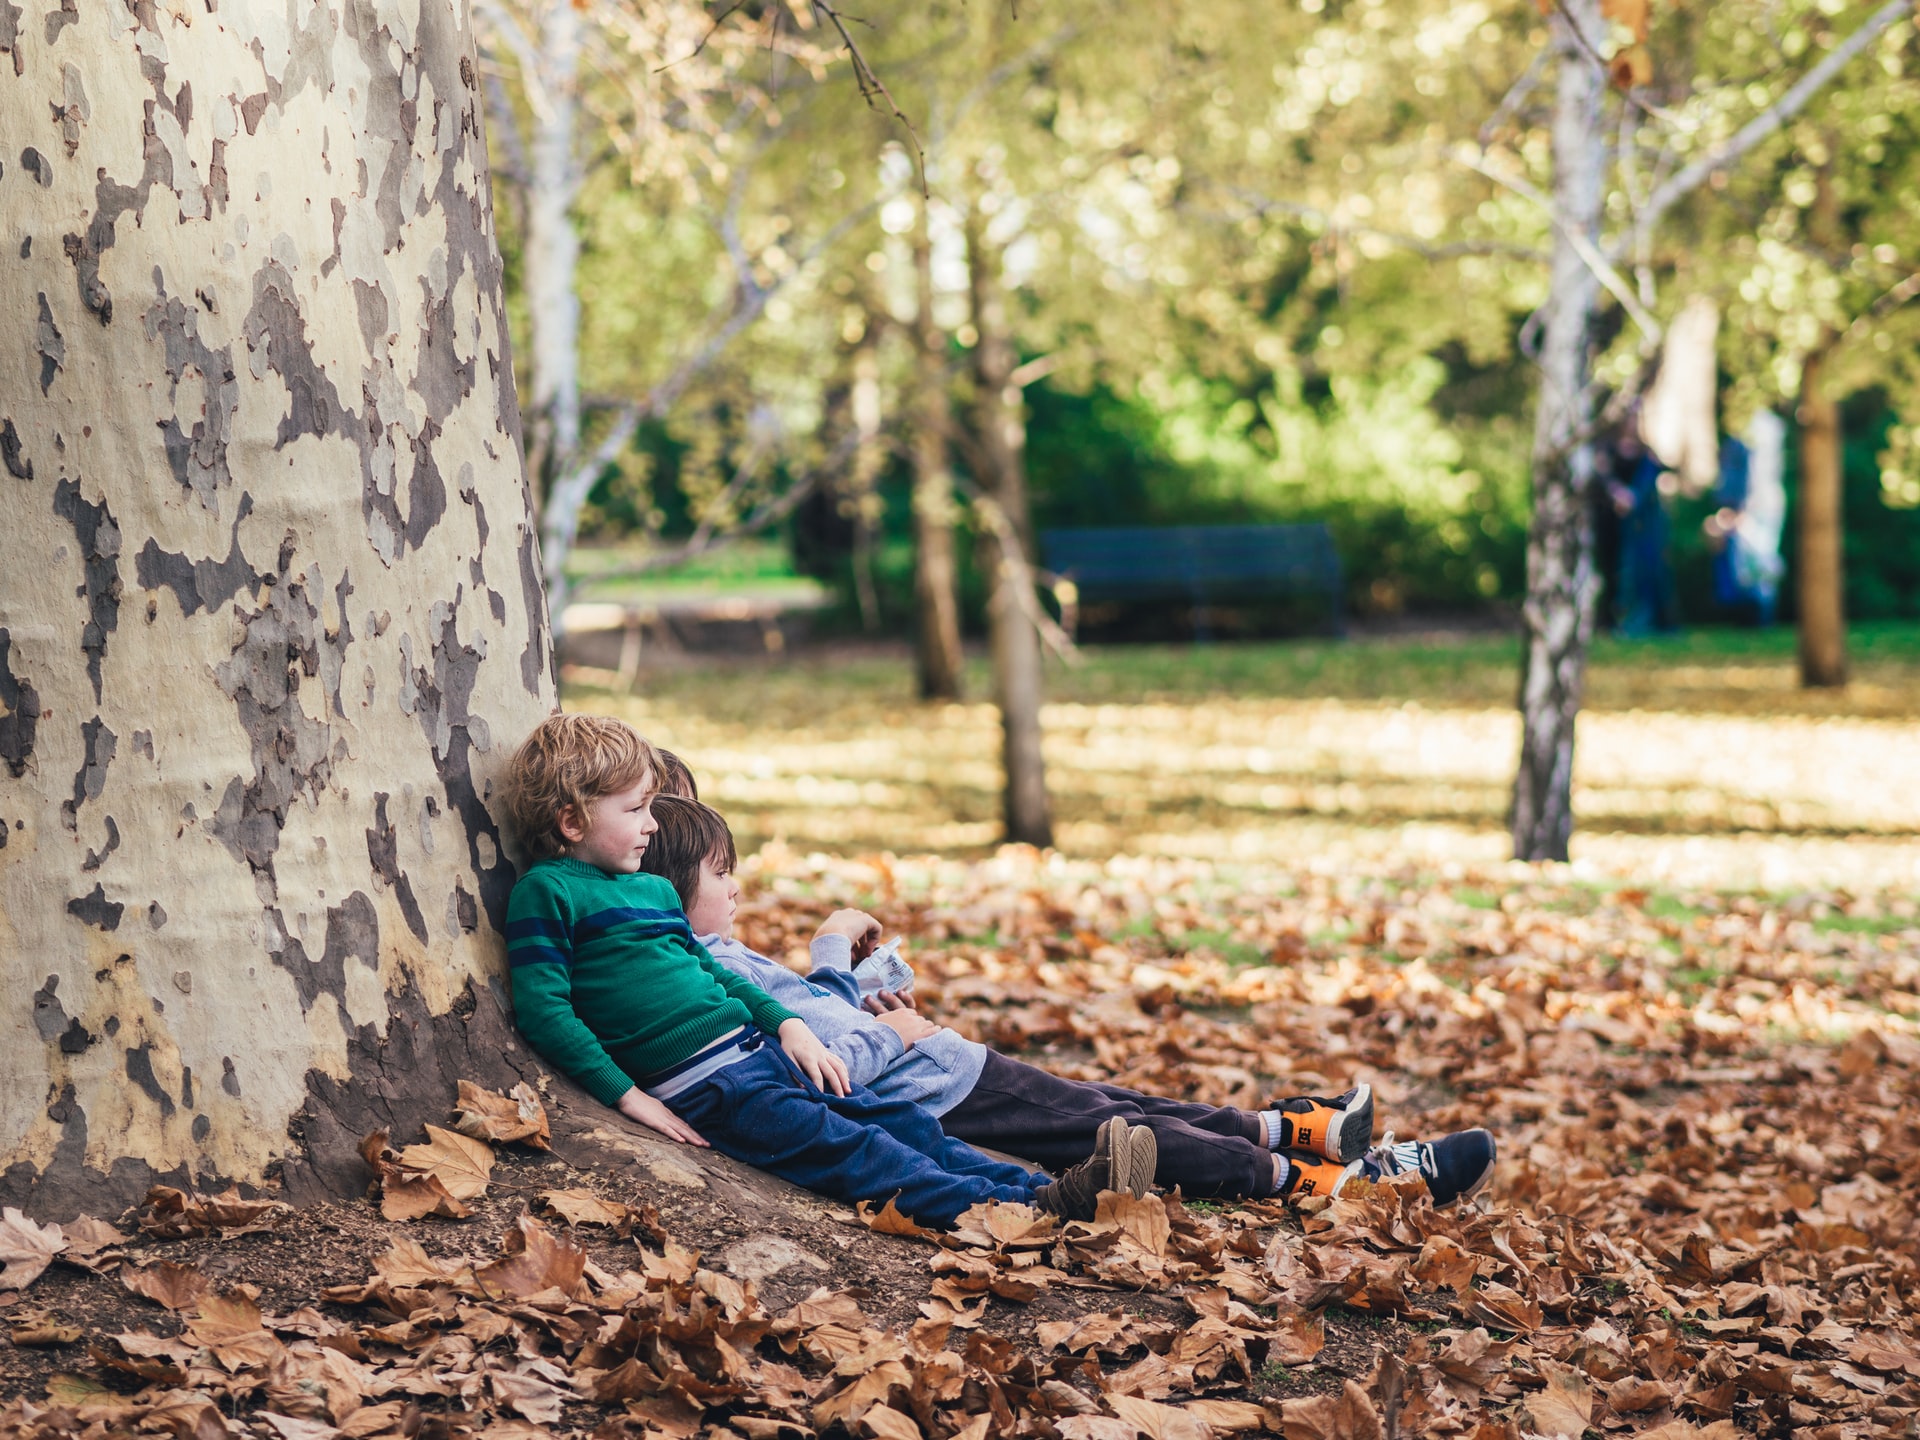 mindfulness activities for kids this fall